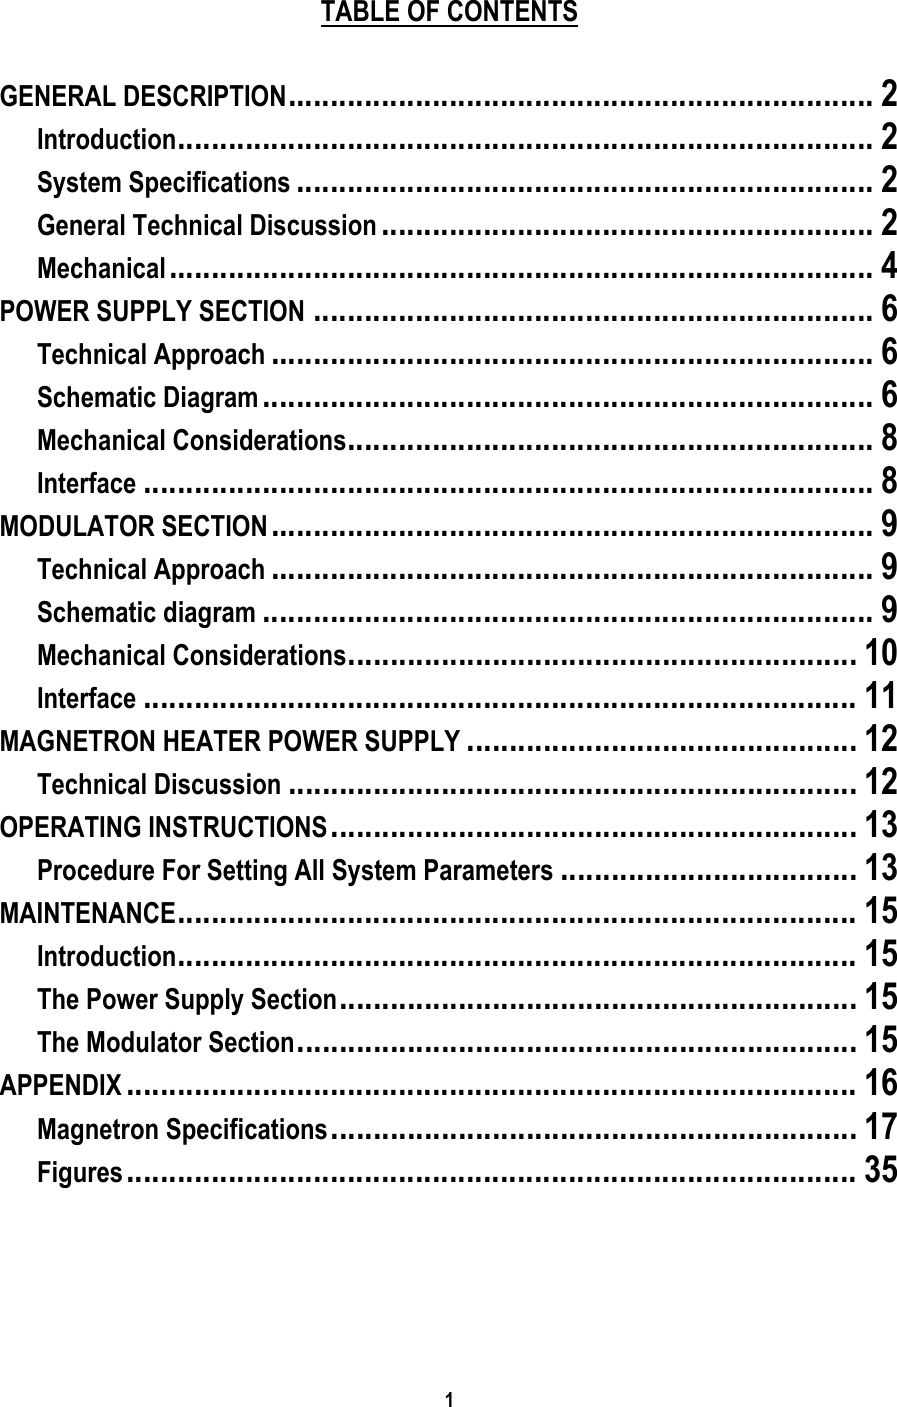 1     TABLE OF CONTENTS    GENERAL DESCRIPTION..................................................................... 2 Introduction.................................................................................. 2 System Specifications .................................................................... 2 General Technical Discussion .......................................................... 2 Mechanical................................................................................... 4 POWER SUPPLY SECTION .................................................................. 6 Technical Approach ....................................................................... 6 Schematic Diagram ........................................................................ 6 Mechanical Considerations.............................................................. 8 Interface ...................................................................................... 8 MODULATOR SECTION....................................................................... 9 Technical Approach ....................................................................... 9 Schematic diagram ........................................................................ 9 Mechanical Considerations............................................................ 10 Interface .................................................................................... 11 MAGNETRON HEATER POWER SUPPLY .............................................. 12 Technical Discussion ................................................................... 12 OPERATING INSTRUCTIONS.............................................................. 13 Procedure For Setting All System Parameters ................................... 13 MAINTENANCE................................................................................ 15 Introduction................................................................................ 15 The Power Supply Section............................................................. 15 The Modulator Section.................................................................. 15 APPENDIX ...................................................................................... 16 Magnetron Specifications.............................................................. 17 Figures...................................................................................... 35  